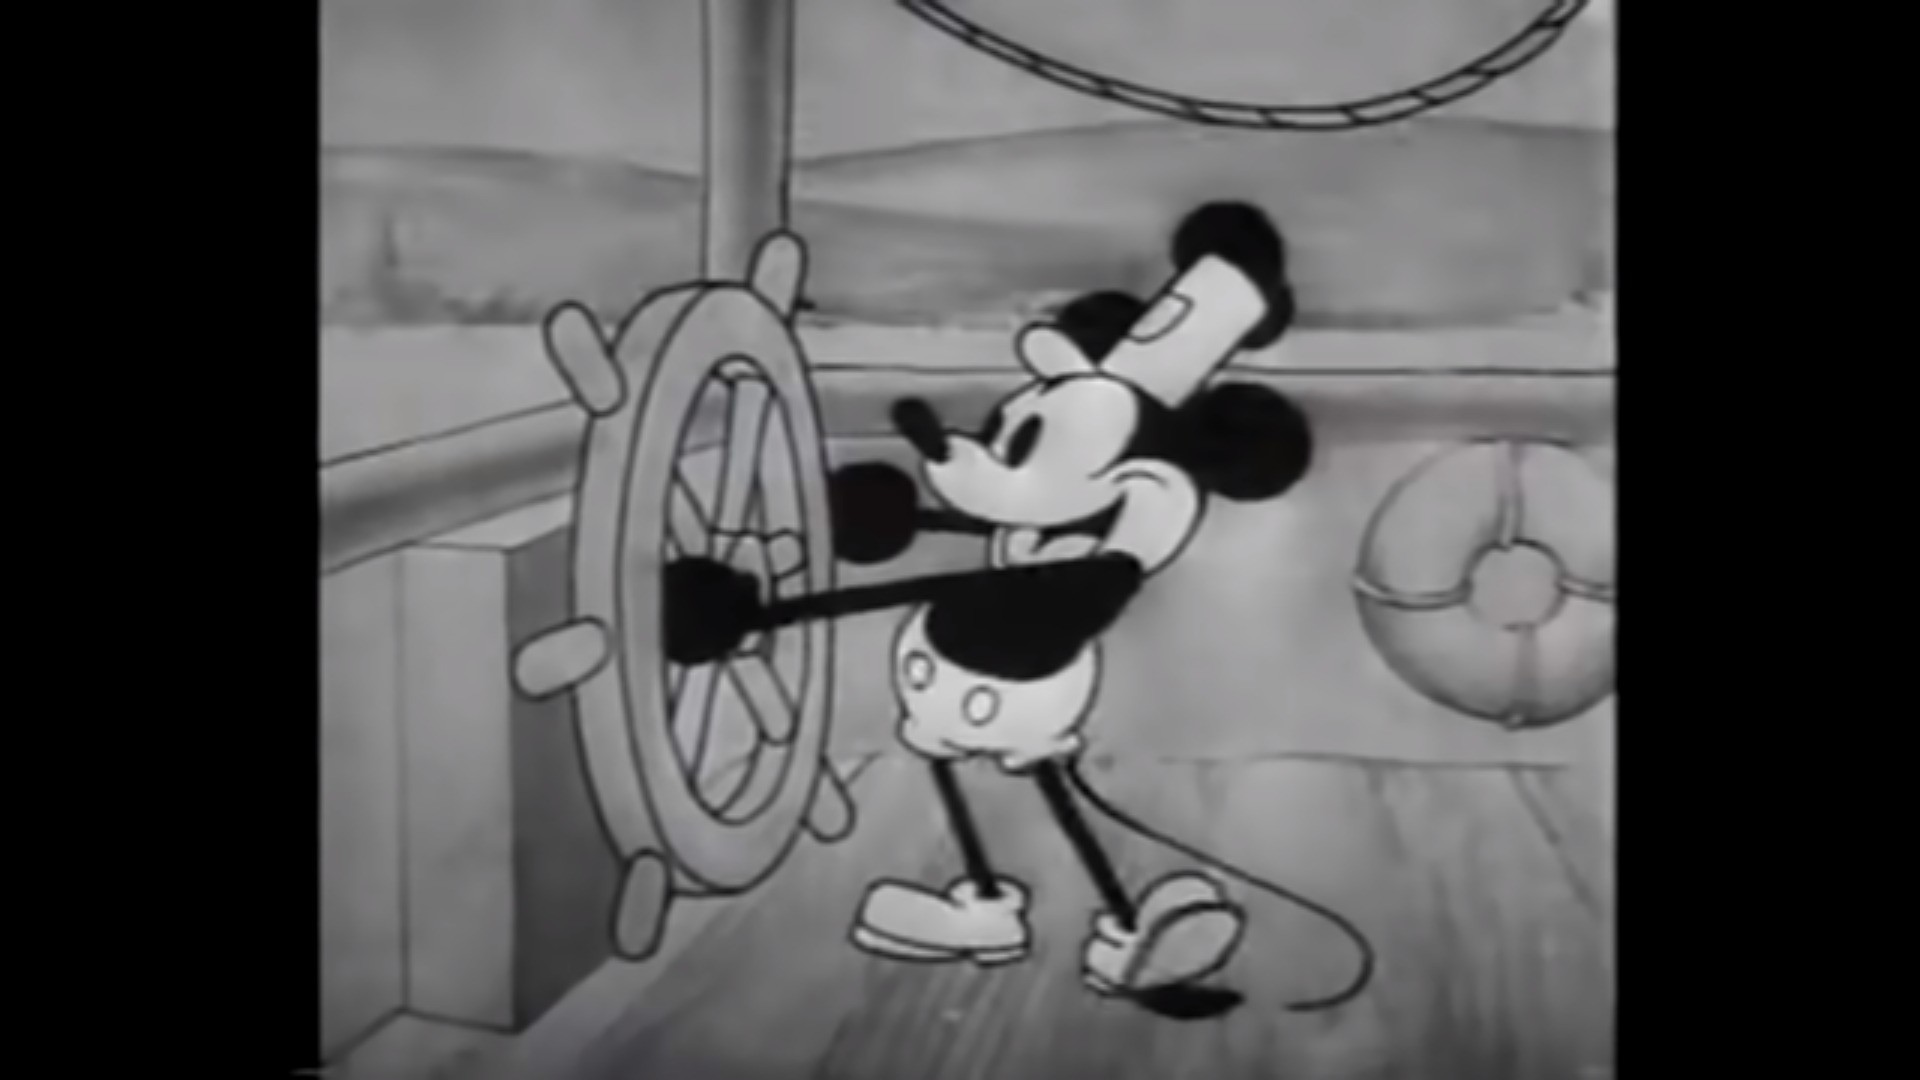 Screenshot of https://www.youtube.com/watch?v=BBgghnQF6E4 displaying a still image from the cartoon Steamboat Willie 